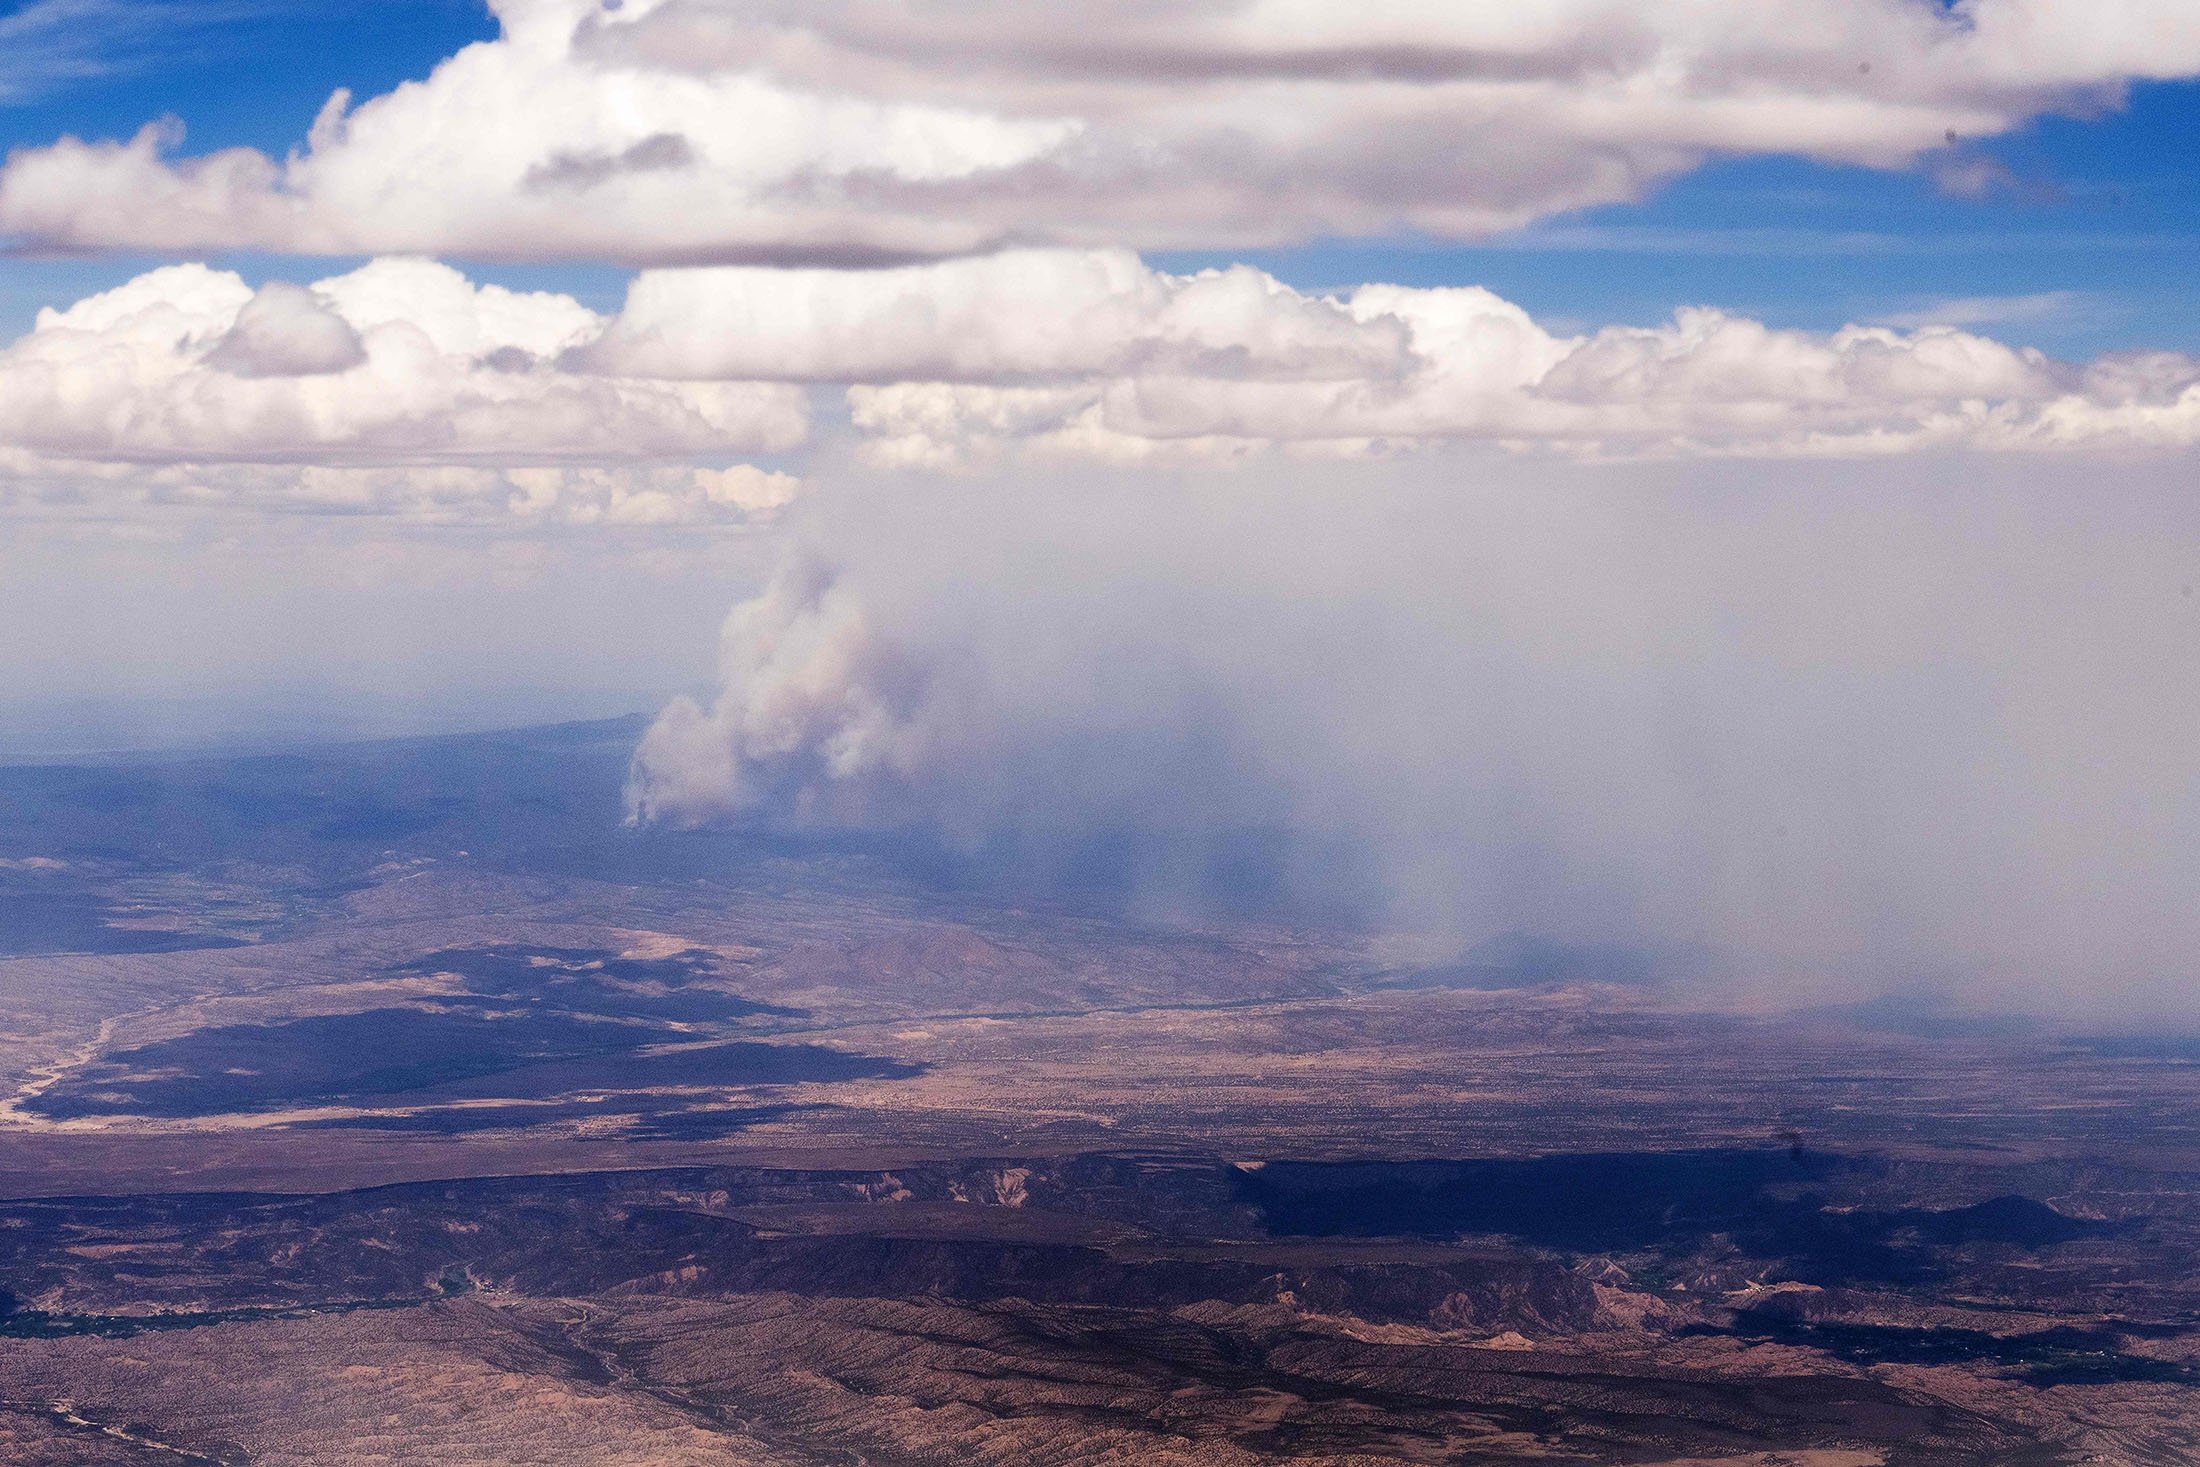 Air Force One, with US President Joe Biden, flies over wildfires, in New Mexico, US, June 11, 2022. (AFP Photo)